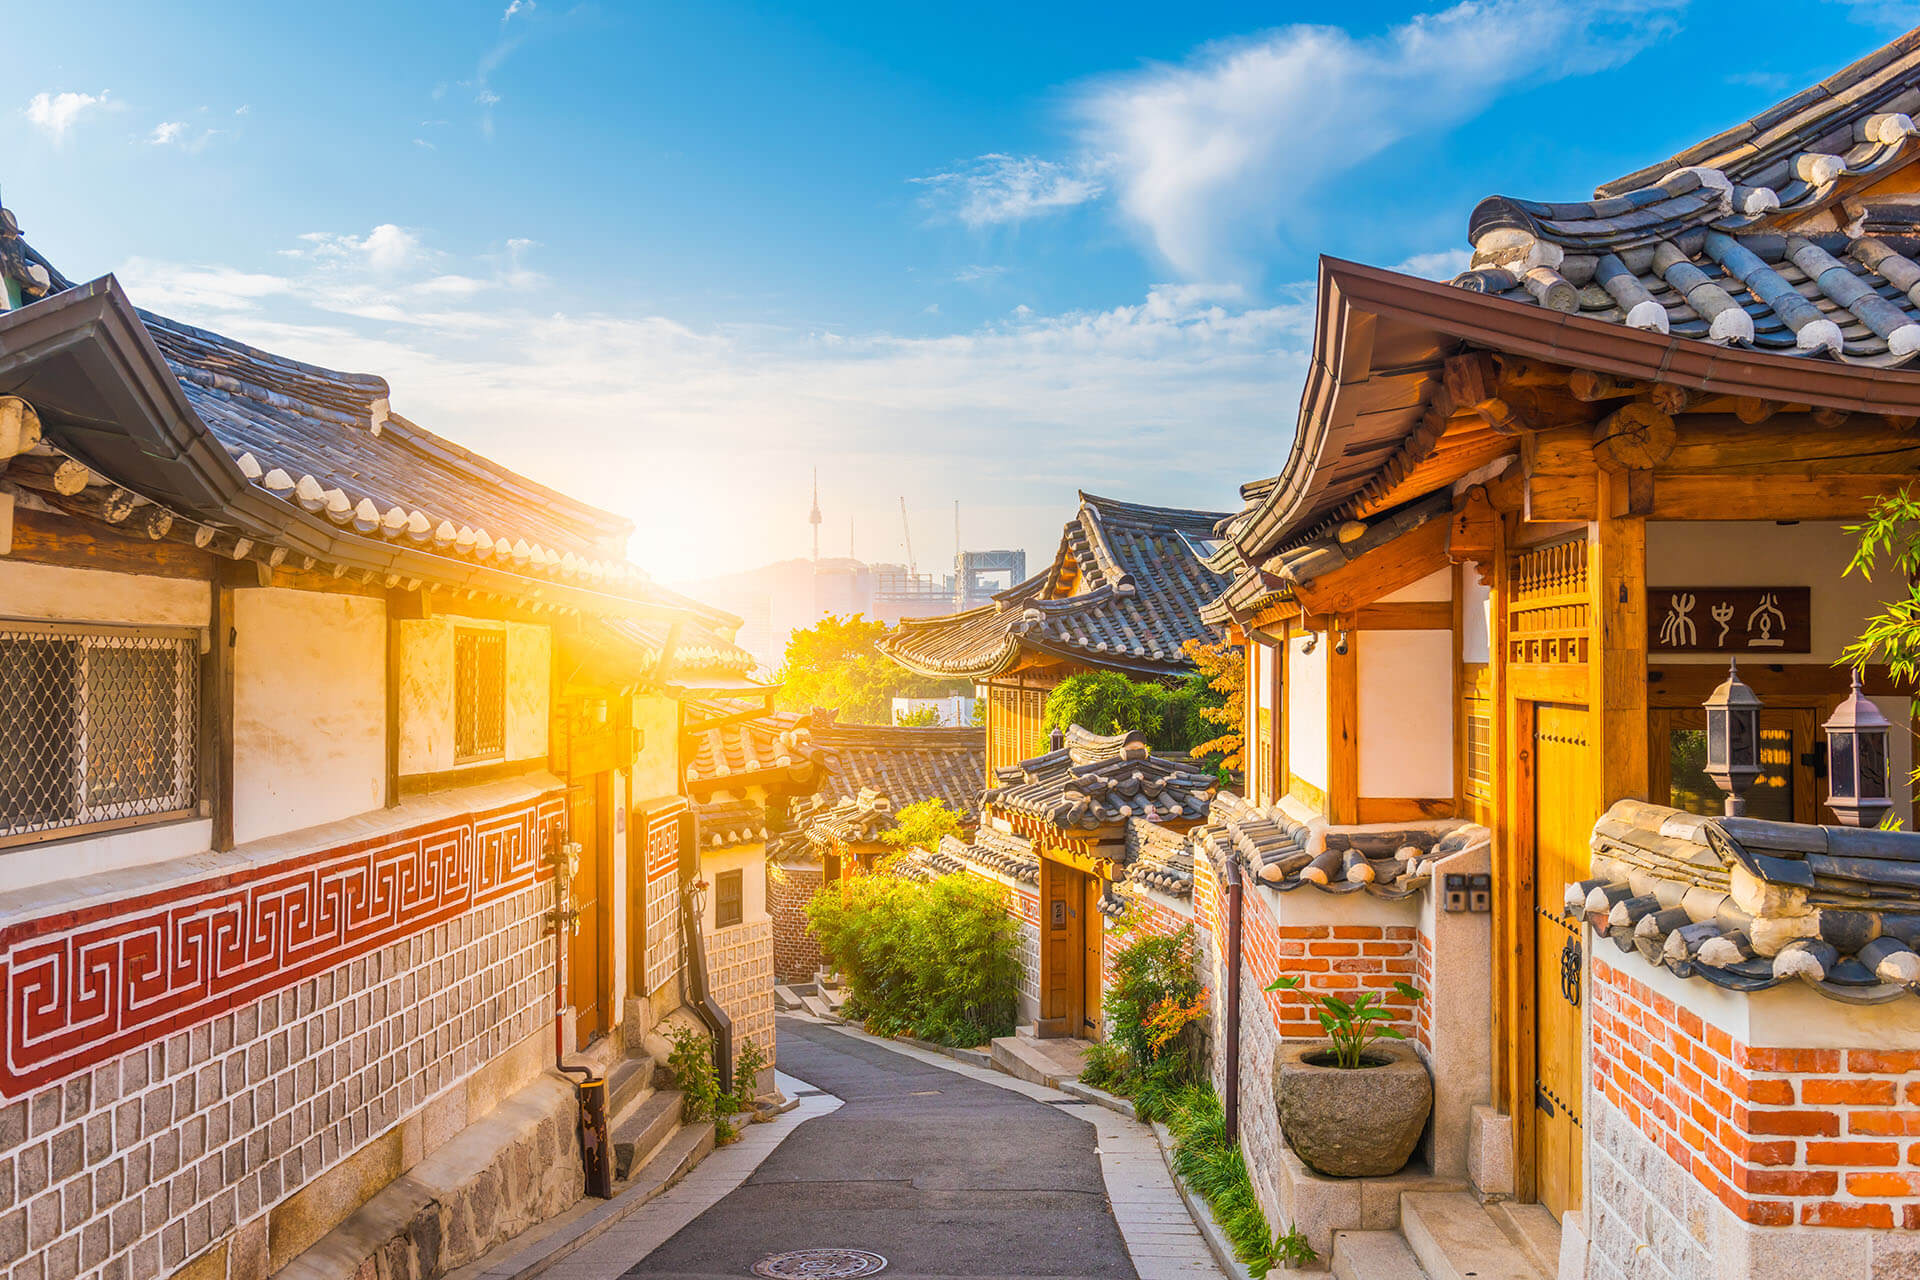 South Korea: Updated COVID-19 Measures for Chinese Travelers